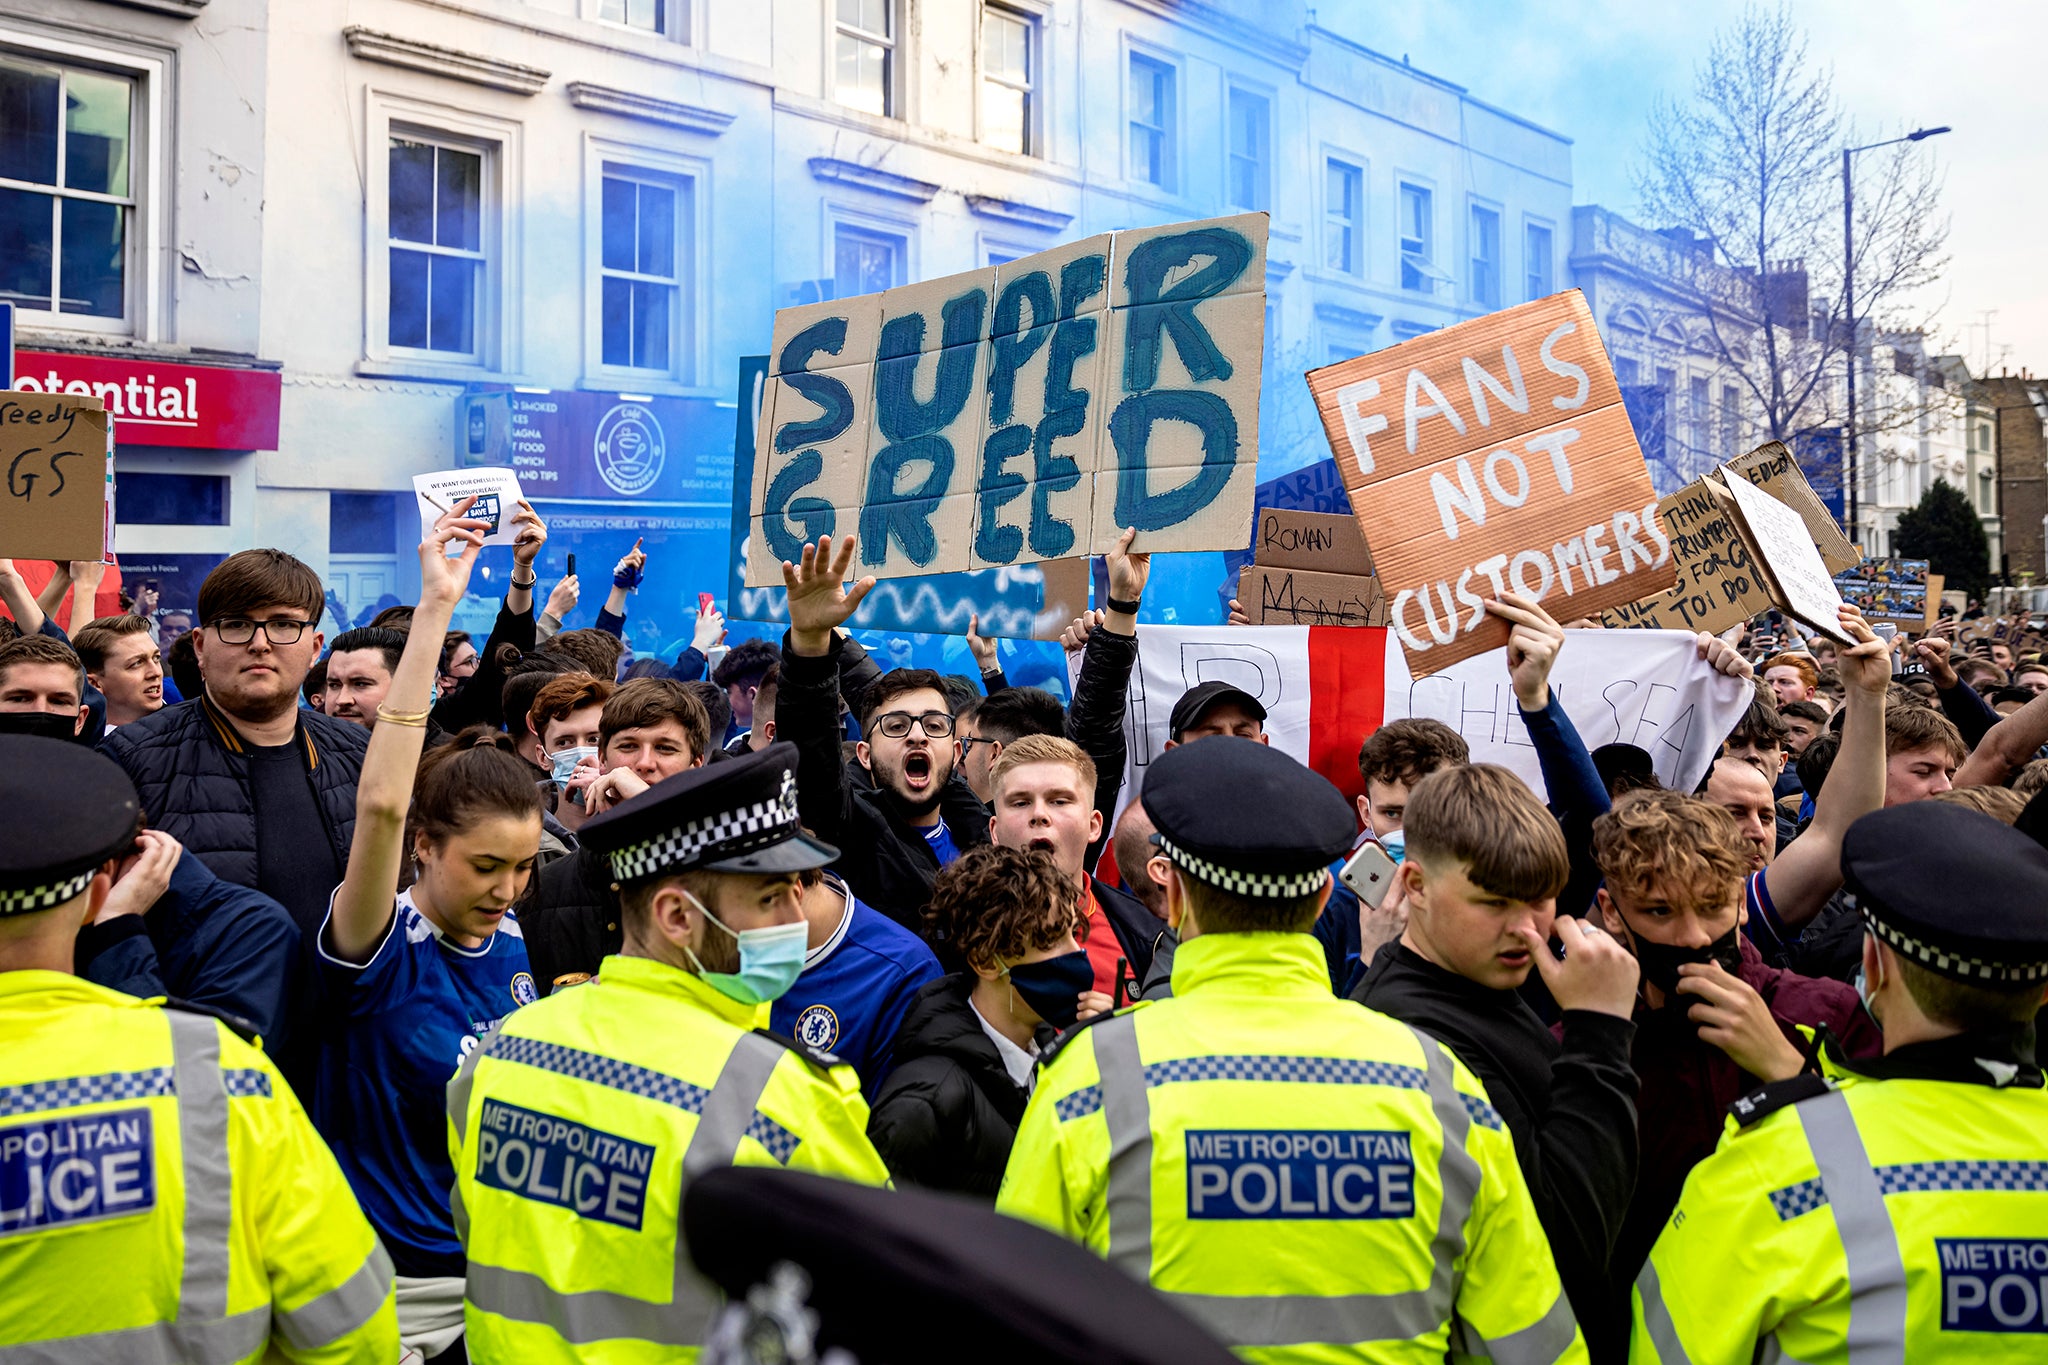 Fans protested in April 2021 when the initial plans were revealed